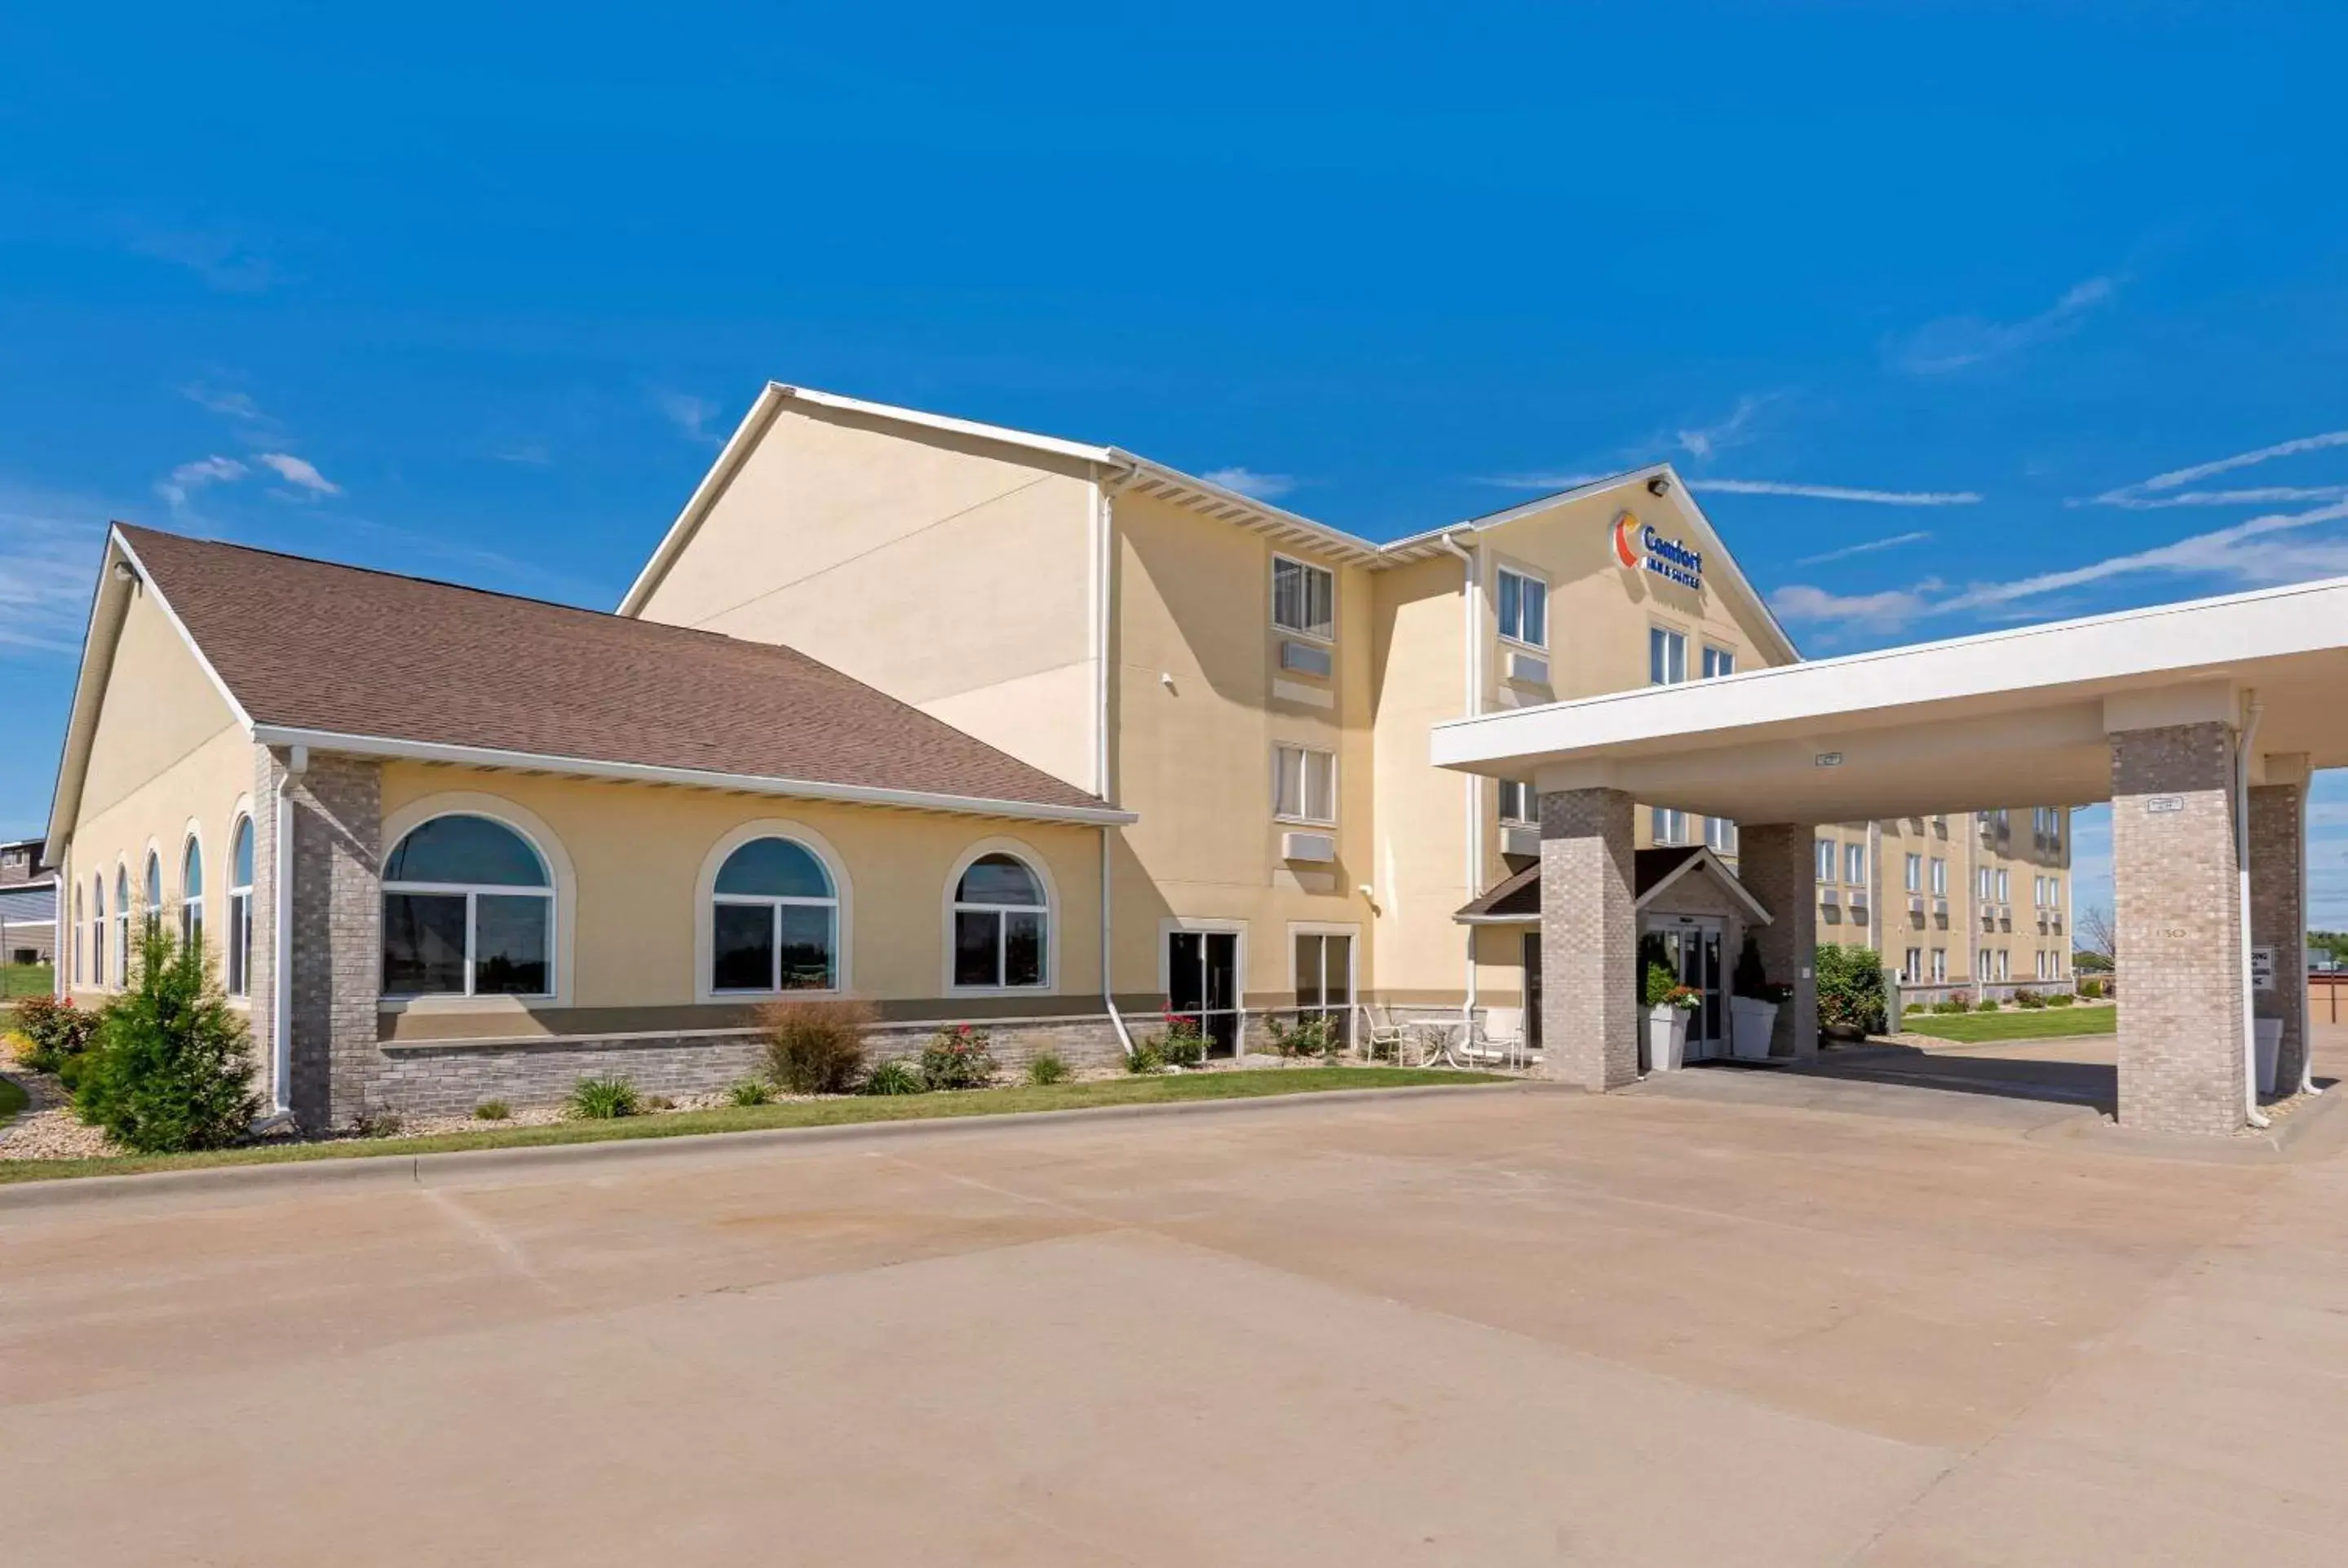 Property Building in Comfort Inn & Suites near Route 66 Award Winning Gold Hotel 2021